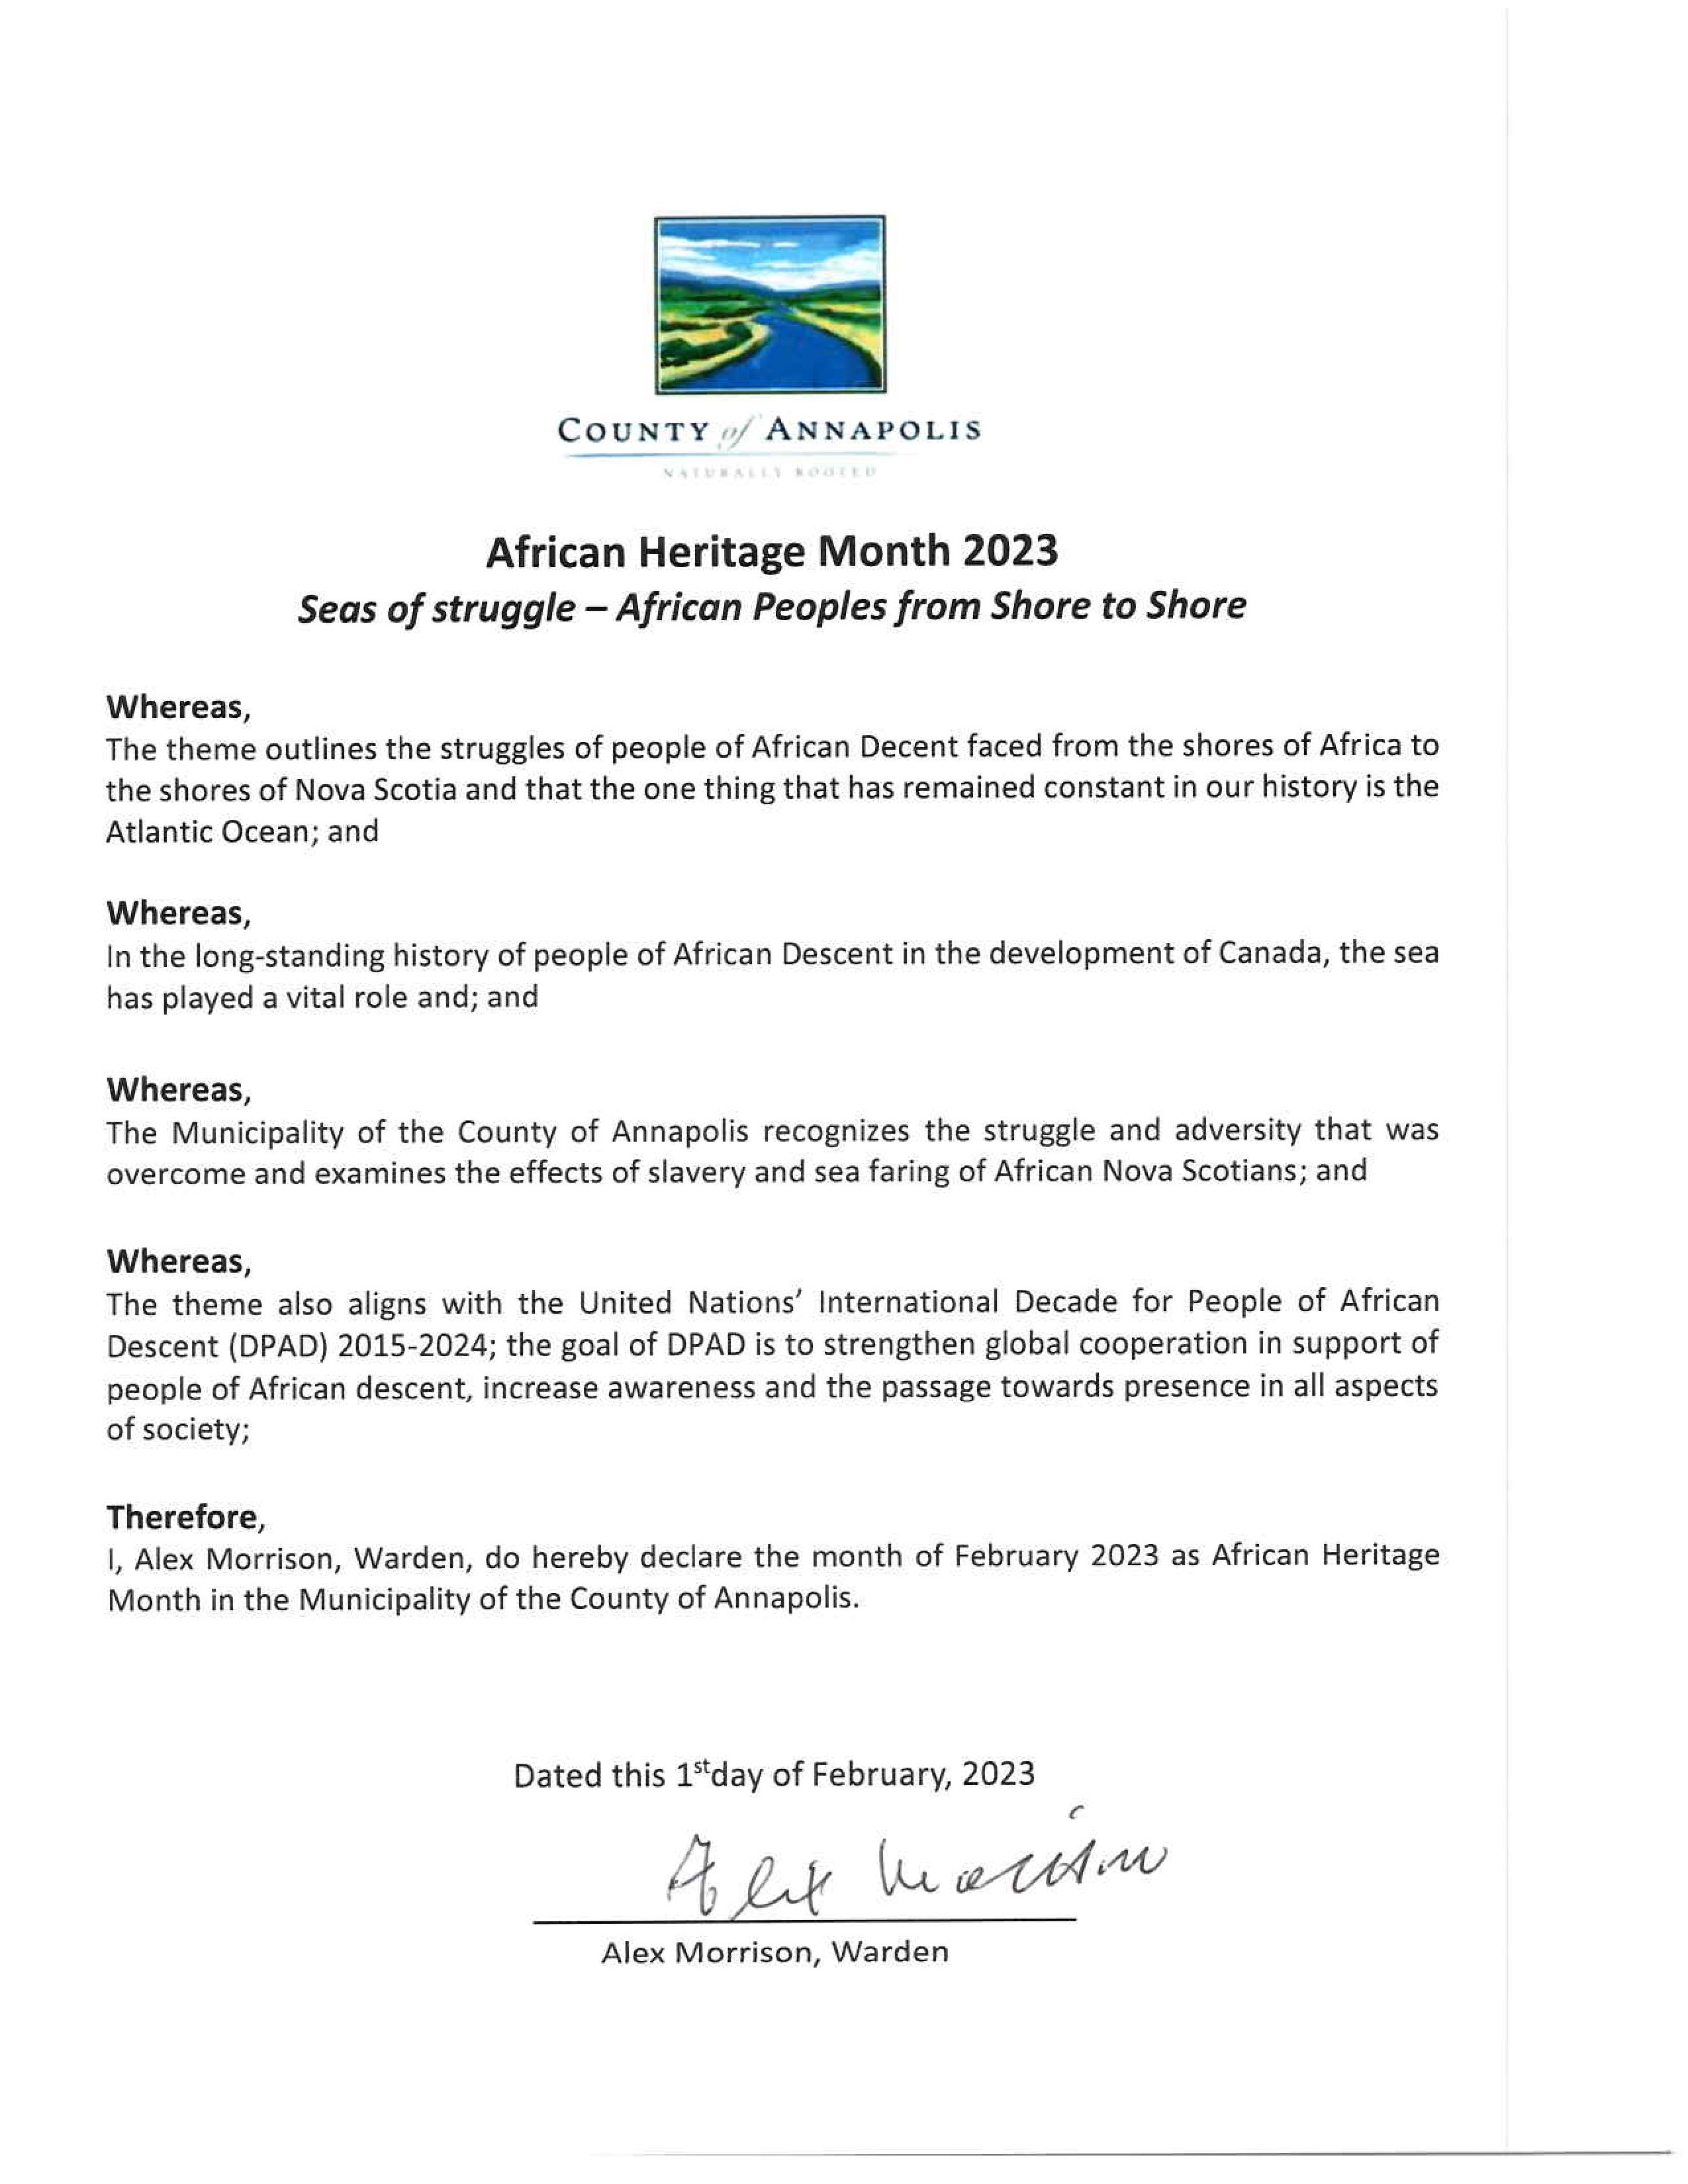 2023 African Heritage Month